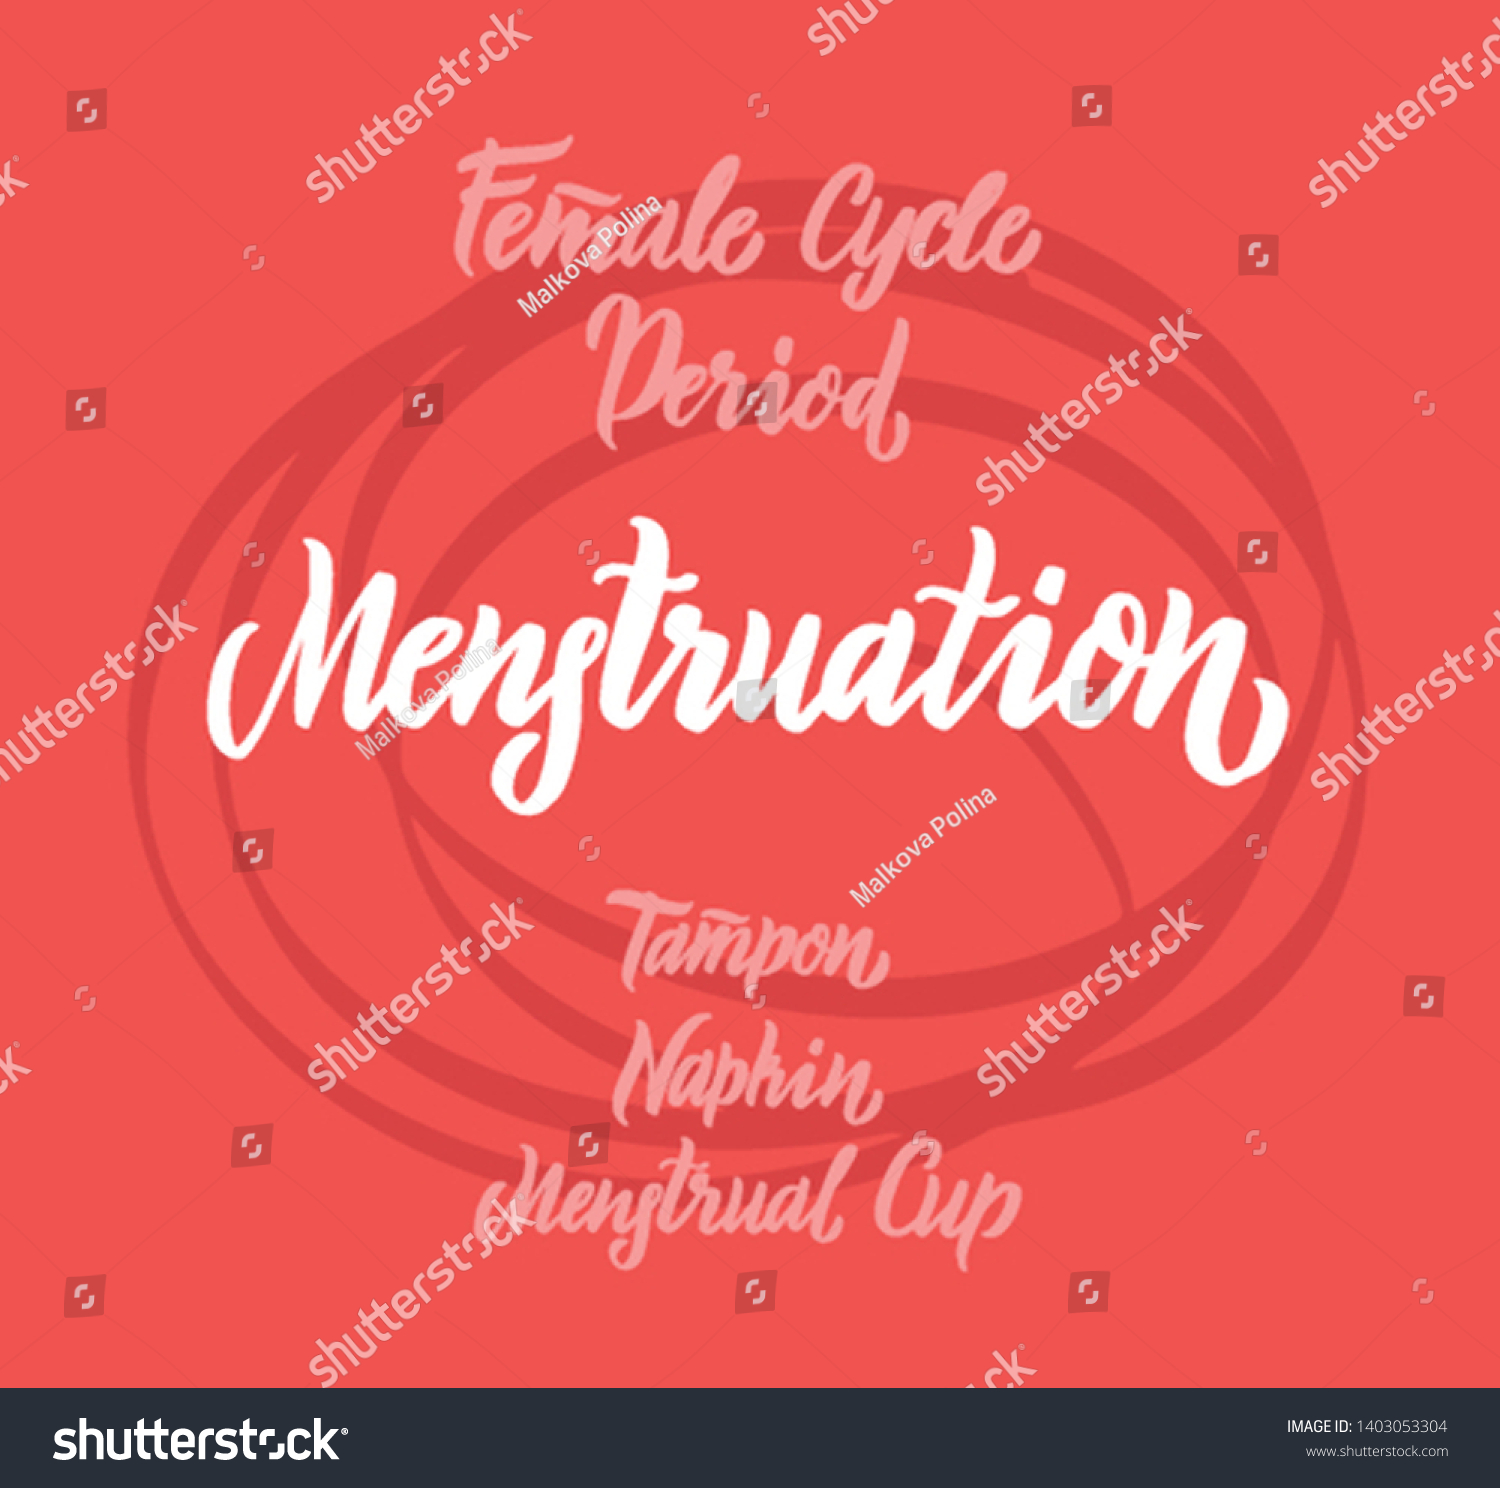 Menstruation Hand Written Lettering Words Period Stock Vector Royalty Free 1403053304 3094